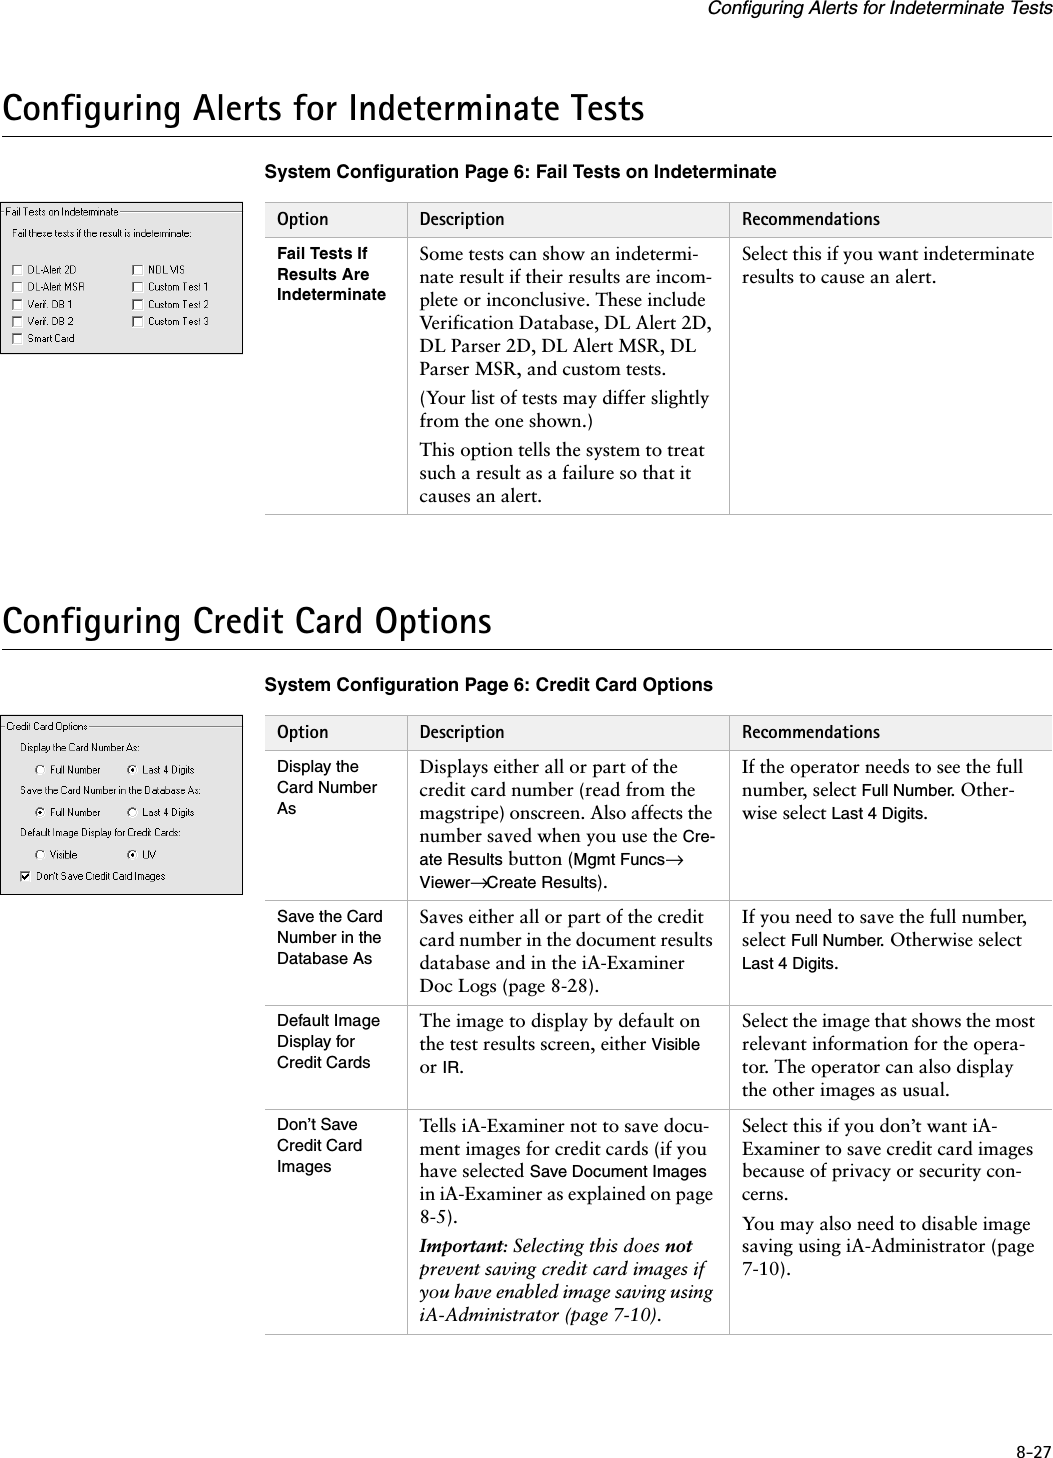 8-27Configuring Alerts for Indeterminate TestsConfiguring Alerts for Indeterminate TestsSystem Configuration Page 6: Fail Tests on IndeterminateConfiguring Credit Card OptionsSystem Configuration Page 6: Credit Card OptionsOption Description RecommendationsFail Tests If Results Are IndeterminateSome tests can show an indetermi-nate result if their results are incom-plete or inconclusive. These include Verification Database, DL Alert 2D, DL Parser 2D, DL Alert MSR, DL Parser MSR, and custom tests.(Your list of tests may differ slightly from the one shown.)This option tells the system to treat such a result as a failure so that it causes an alert.Select this if you want indeterminate results to cause an alert.Option Description RecommendationsDisplay the Card Number AsDisplays either all or part of the credit card number (read from the magstripe) onscreen. Also affects the number saved when you use the Cre-ate Results button (Mgmt Funcs→ Viewer→ Create Results).If the operator needs to see the full number, select Full Number. Other-wise select Last 4 Digits.Save the Card Number in the Database AsSaves either all or part of the credit card number in the document results database and in the iA-Examiner Doc Logs (page 8-28).If you need to save the full number, select Full Number. Otherwise select Last 4 Digits.Default Image Display for Credit CardsThe image to display by default on the test results screen, either Visible or IR.Select the image that shows the most relevant information for the opera-tor. The operator can also display the other images as usual.Don’t Save Credit Card ImagesTells iA-Examiner not to save docu-ment images for credit cards (if you have selected Save Document Images in iA-Examiner as explained on page 8-5).Important: Selecting this does not prevent saving credit card images if you have enabled image saving using iA-Administrator (page 7-10).Select this if you don’t want iA-Examiner to save credit card images because of privacy or security con-cerns.You may also need to disable image saving using iA-Administrator (page 7-10).